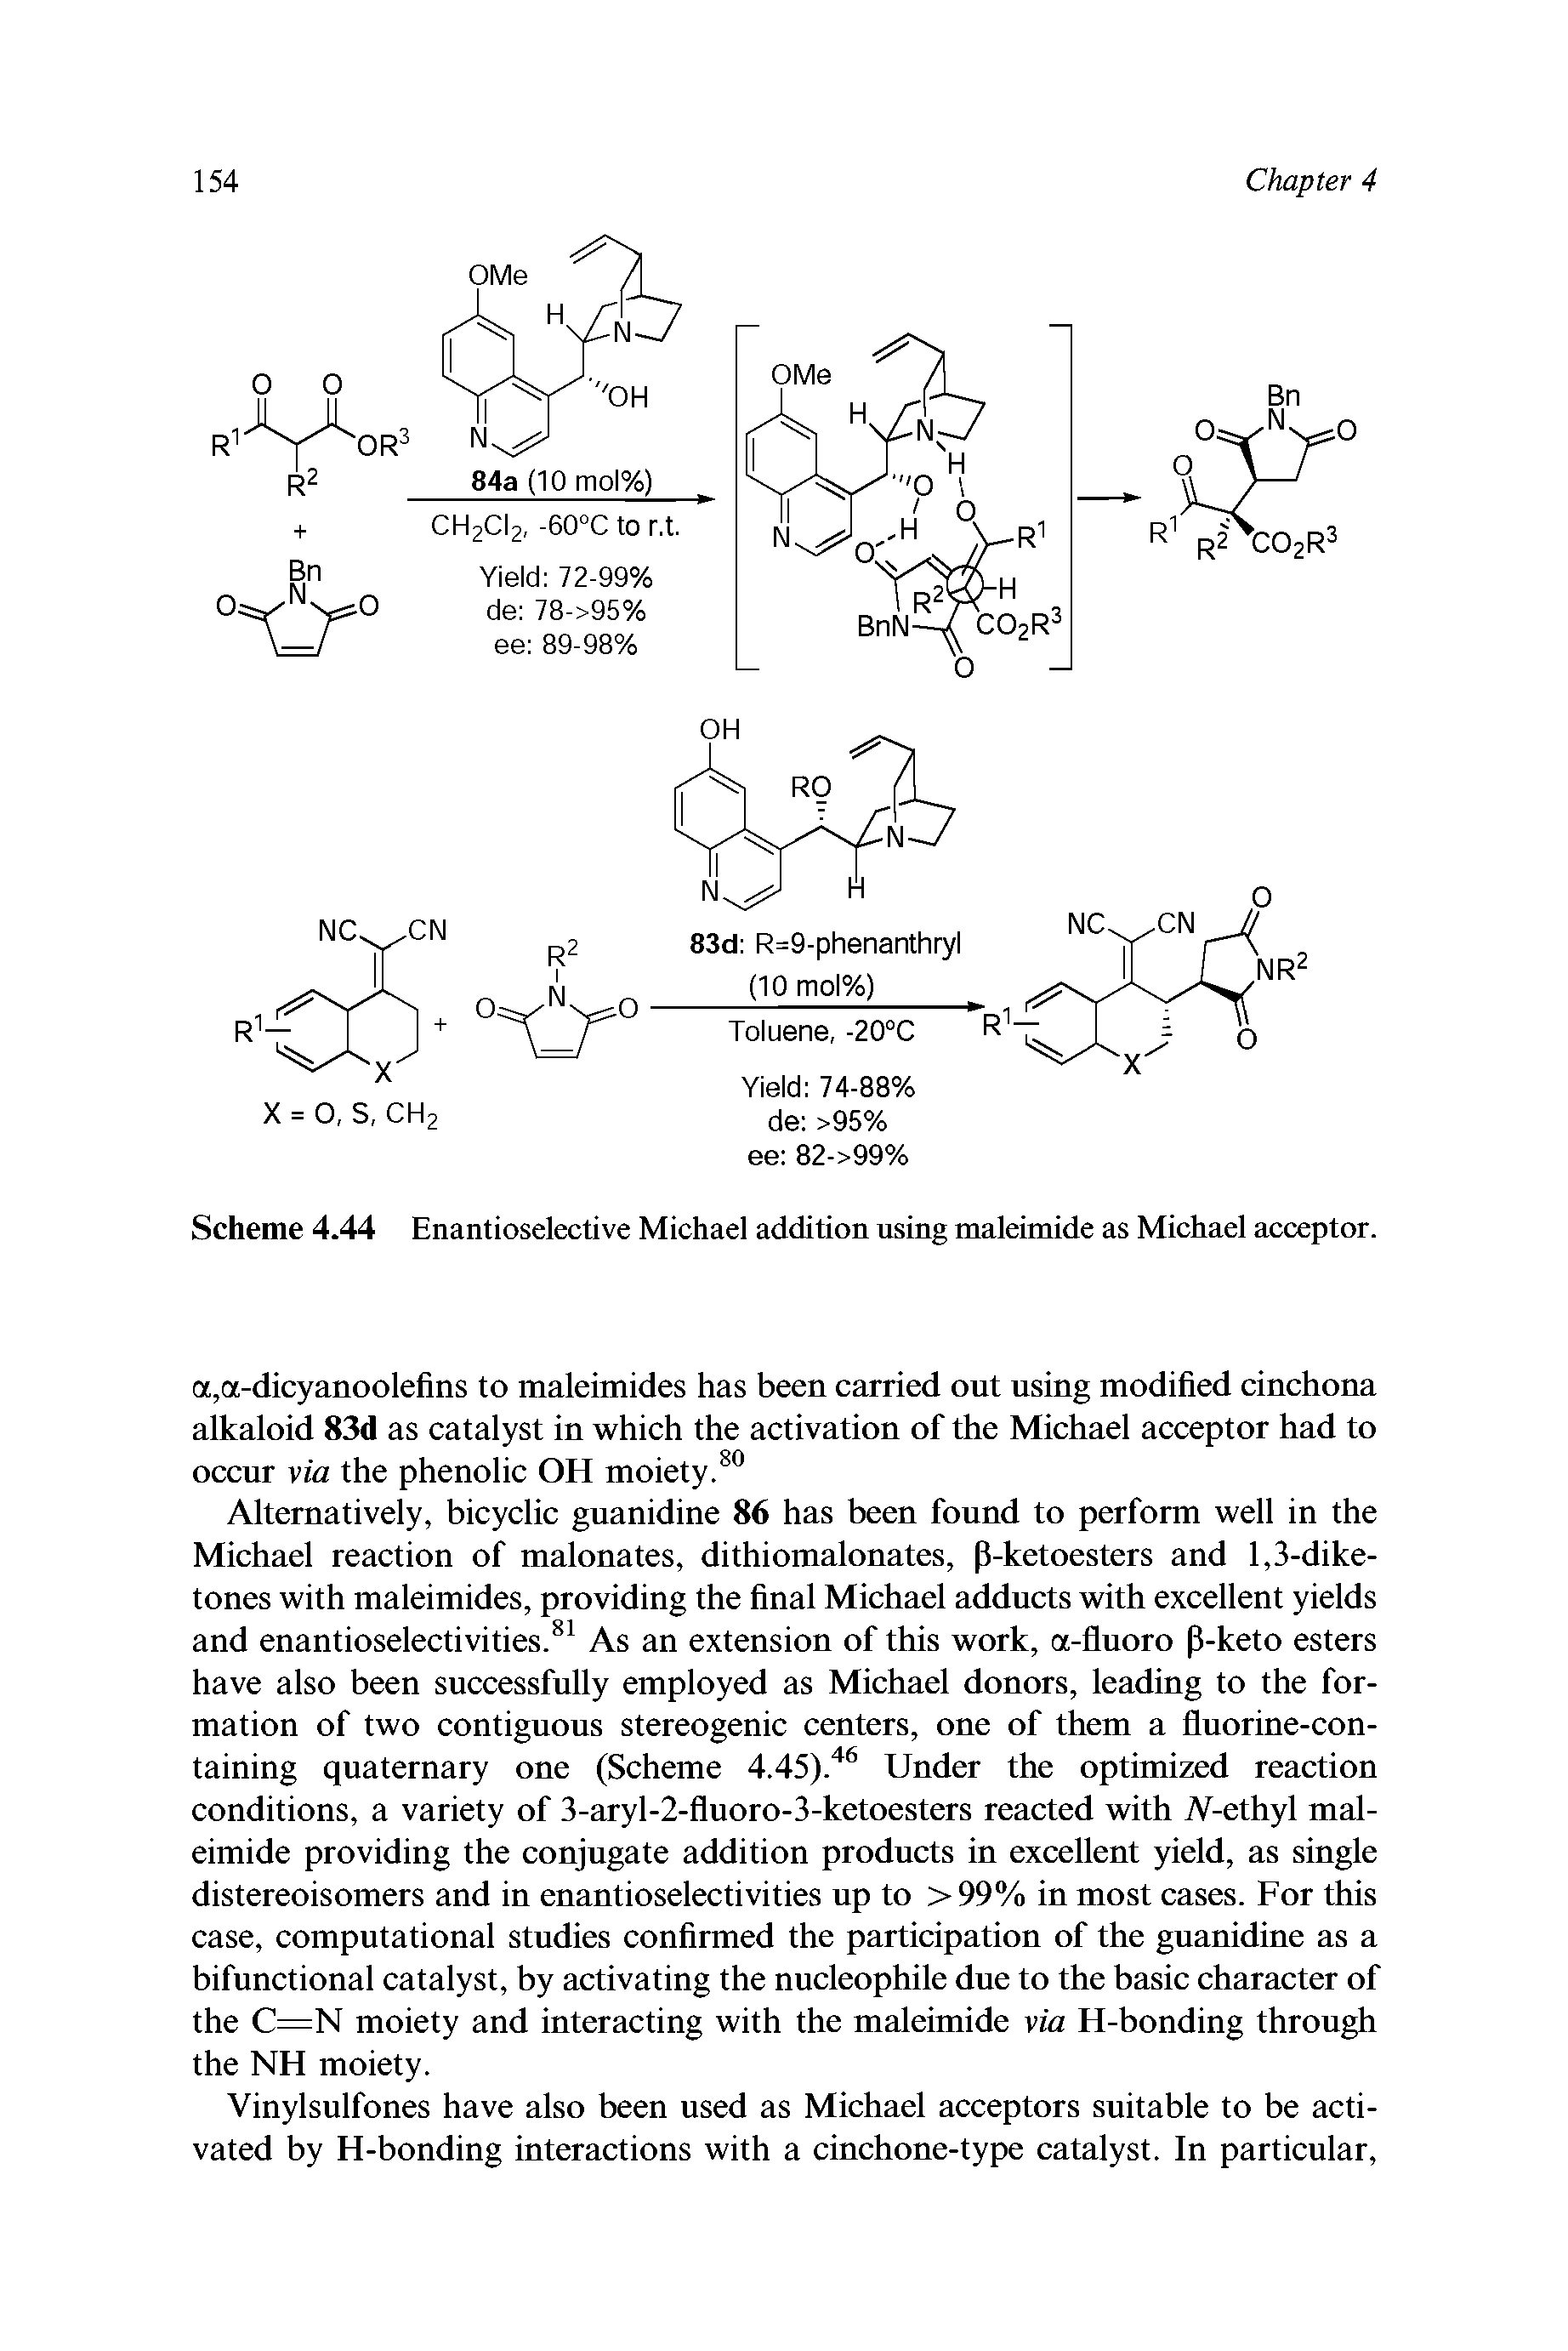 Scheme 4.44 Enantioselective Michael addition using maleimide as Michael acceptor.